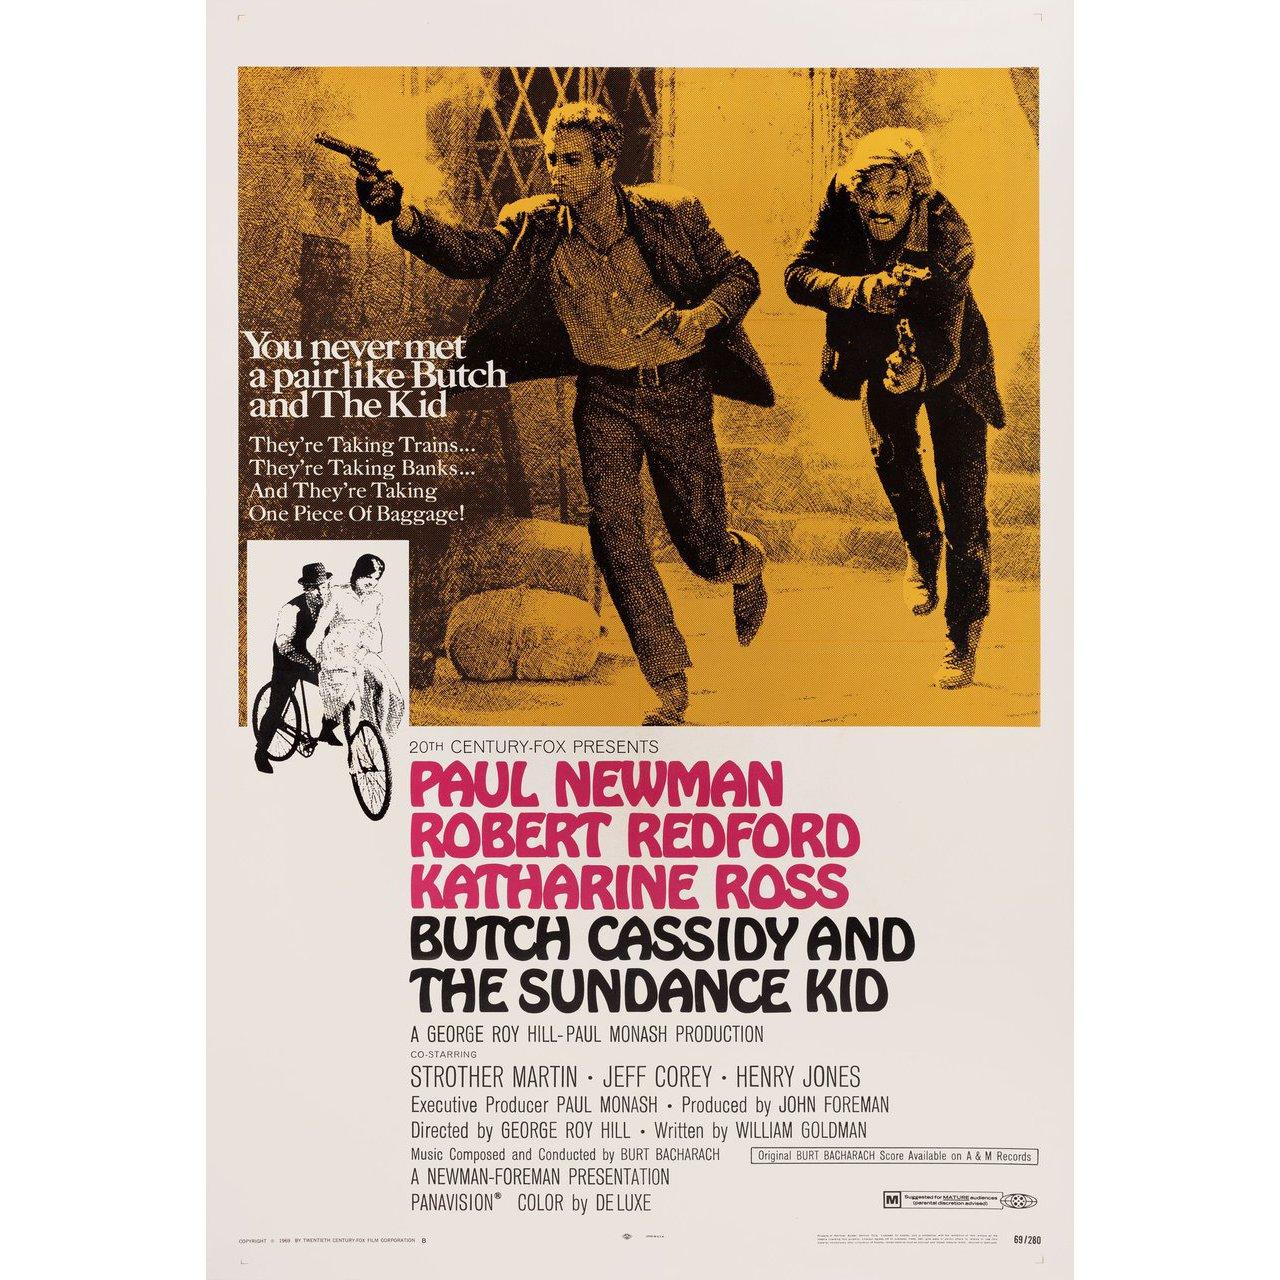 American Butch Cassidy and the Sundance Kid 1969 U.S. One Sheet Film Poster